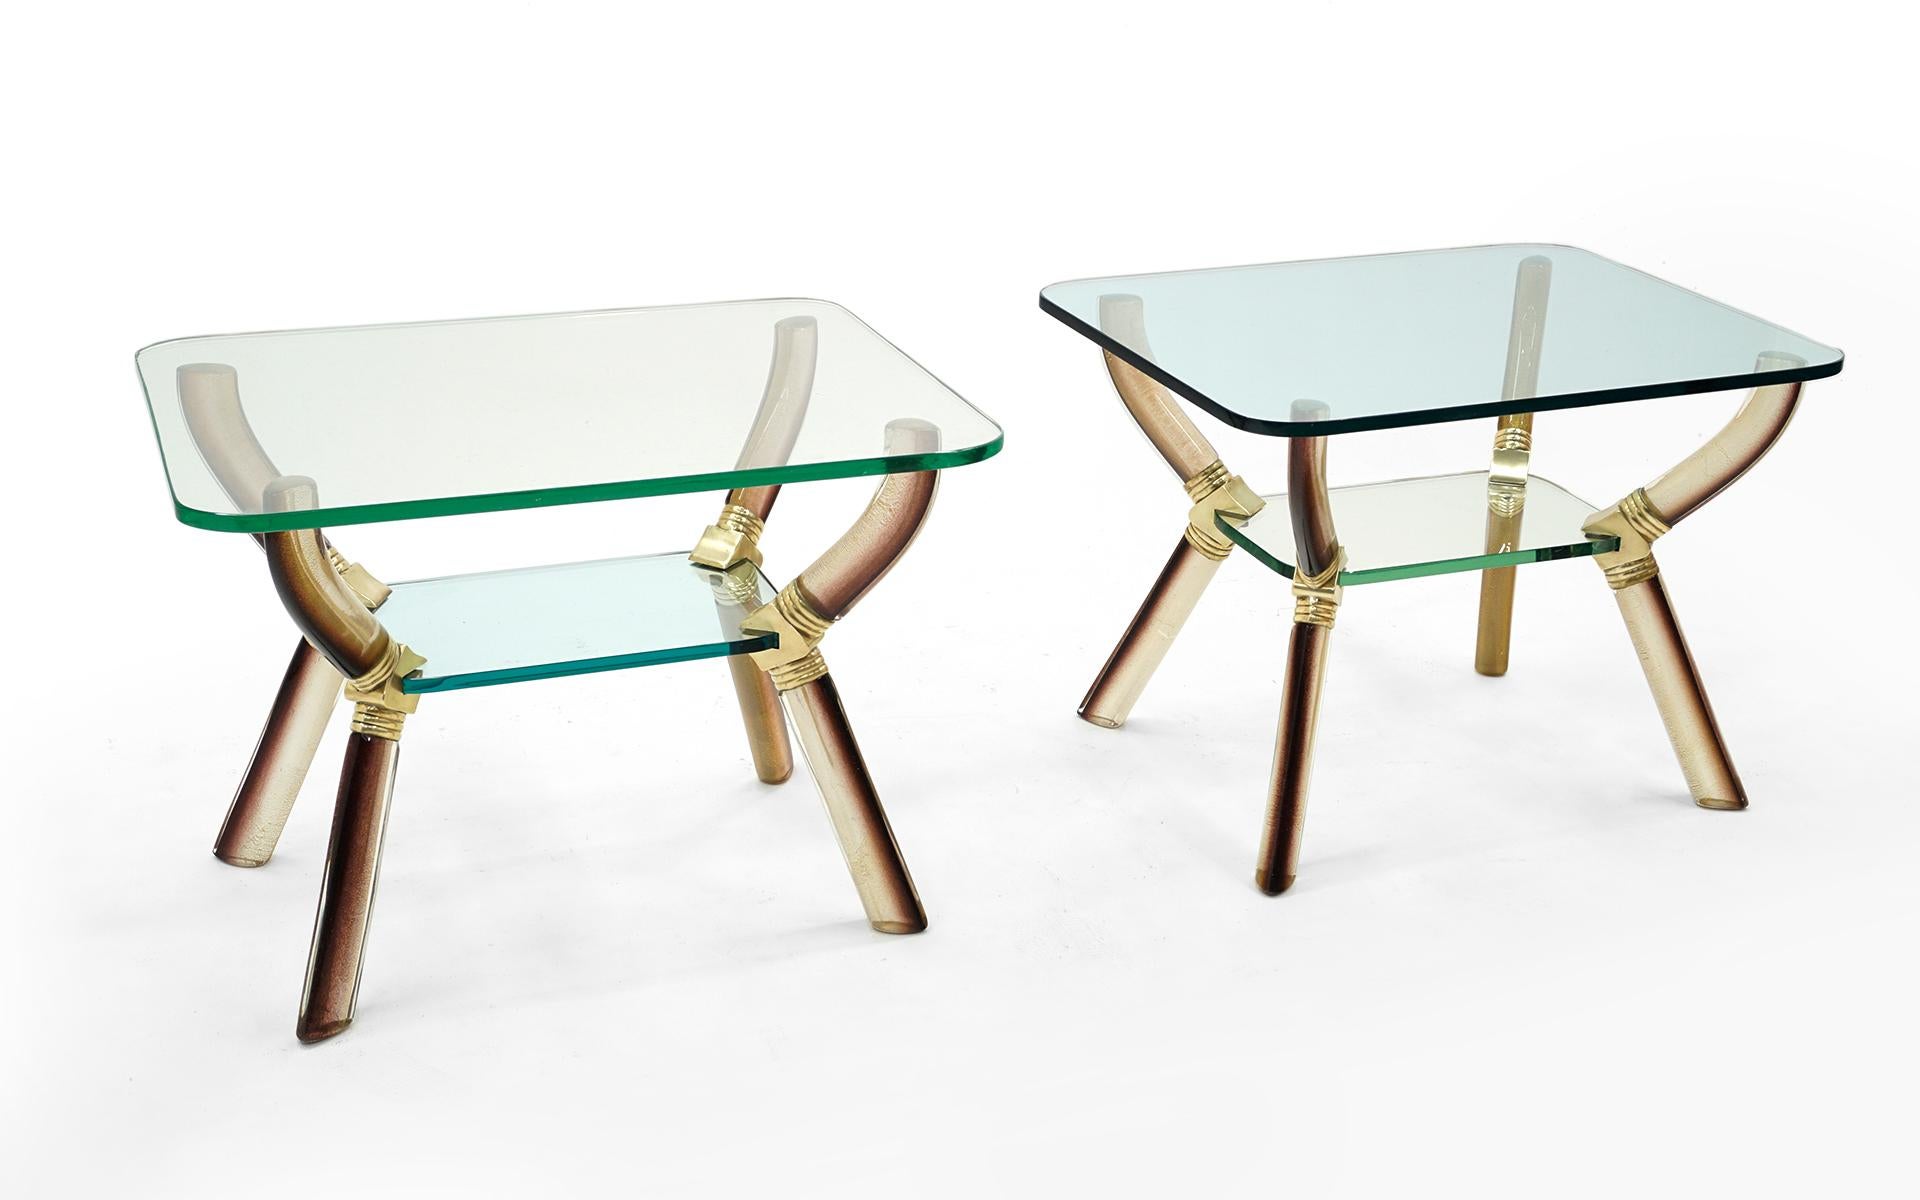 Large scale pair of two tier tables by Vetreria Archimede Seguso, Italy, 1952. Hand-blown a Polveri glass with gold inclusions, glass, brass. No chips or repairs to any of the glass elements. Table tops have light scratches that do not distract from